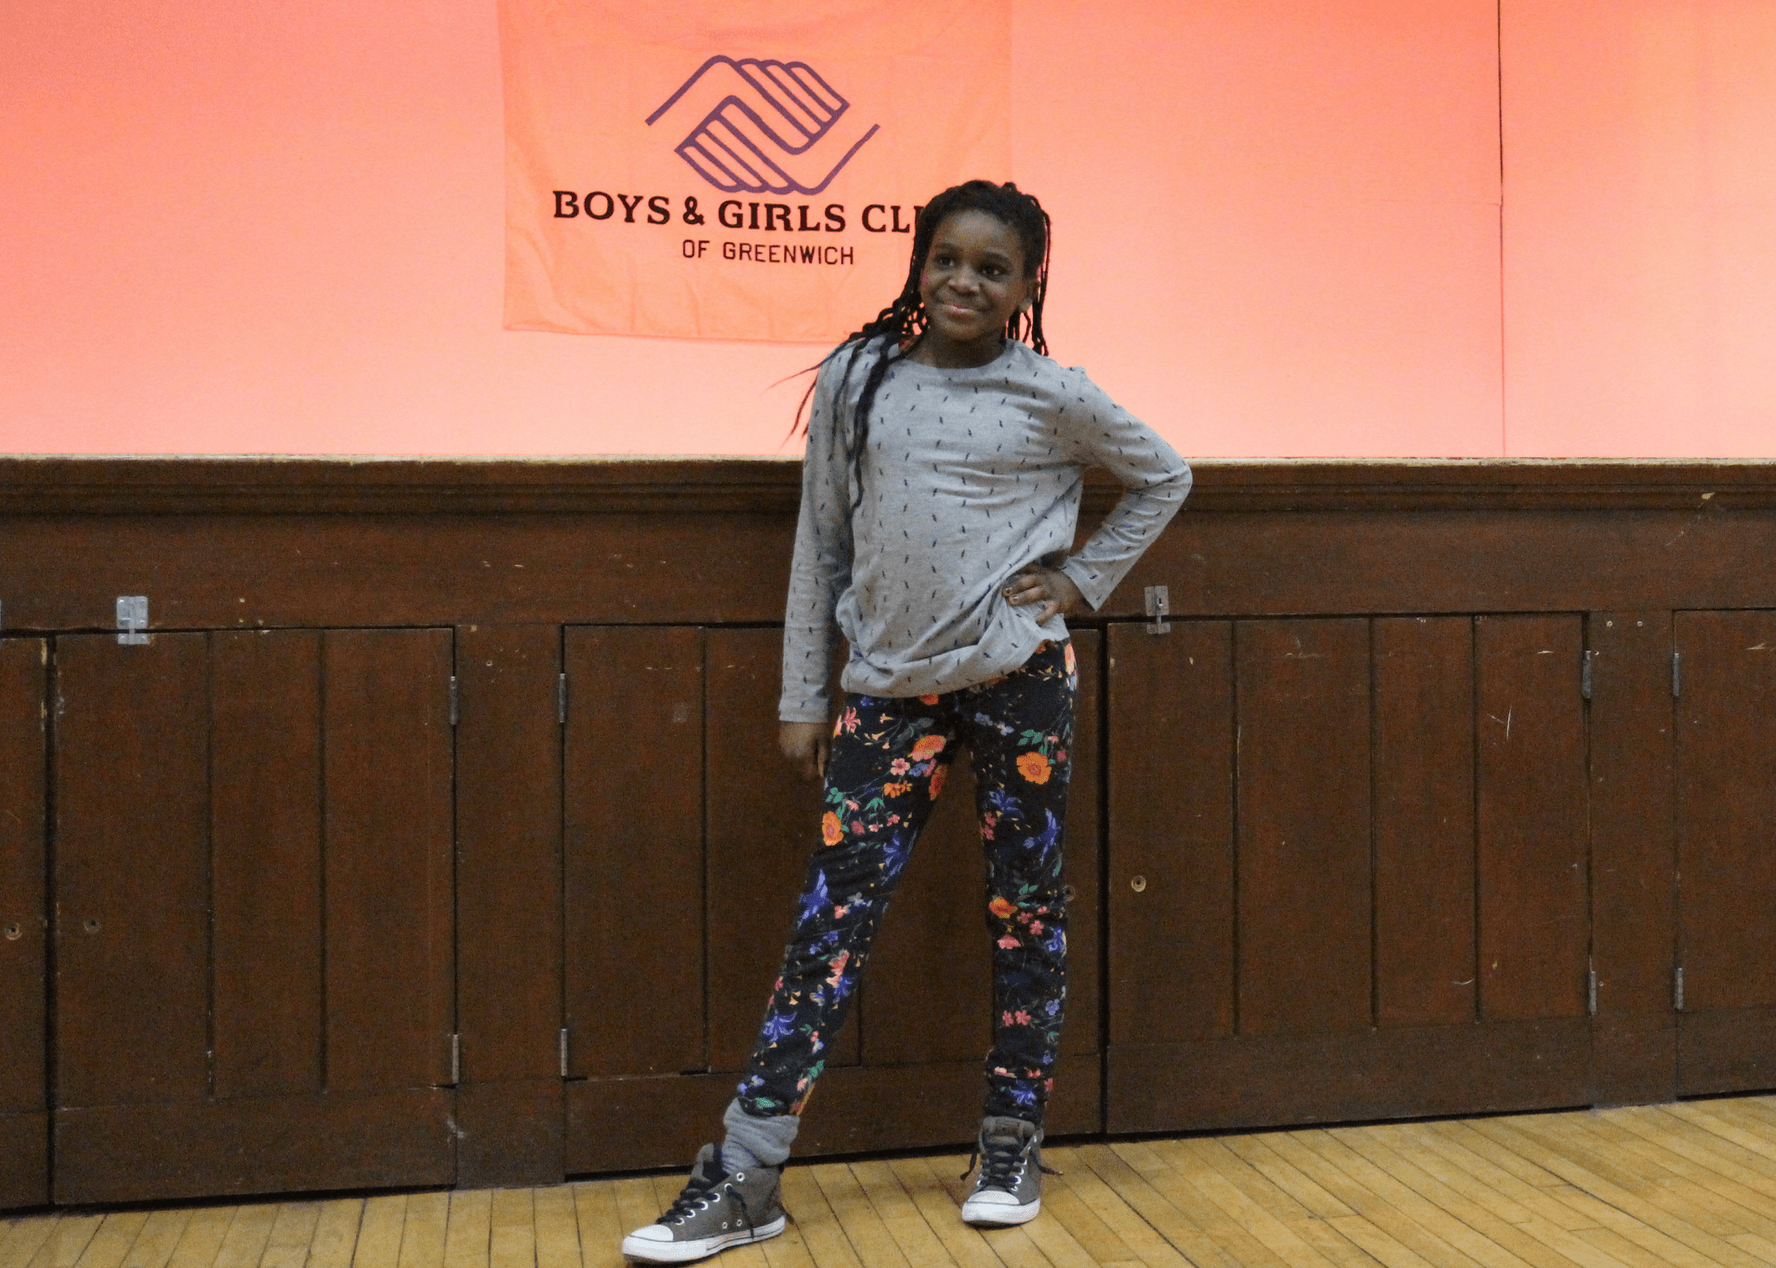 At the Boys & Girls Club of Greenwich, kids modeled Old Navy outfits for friends and family on Friday Jan 26, 2018 Photo: Leslie Yager